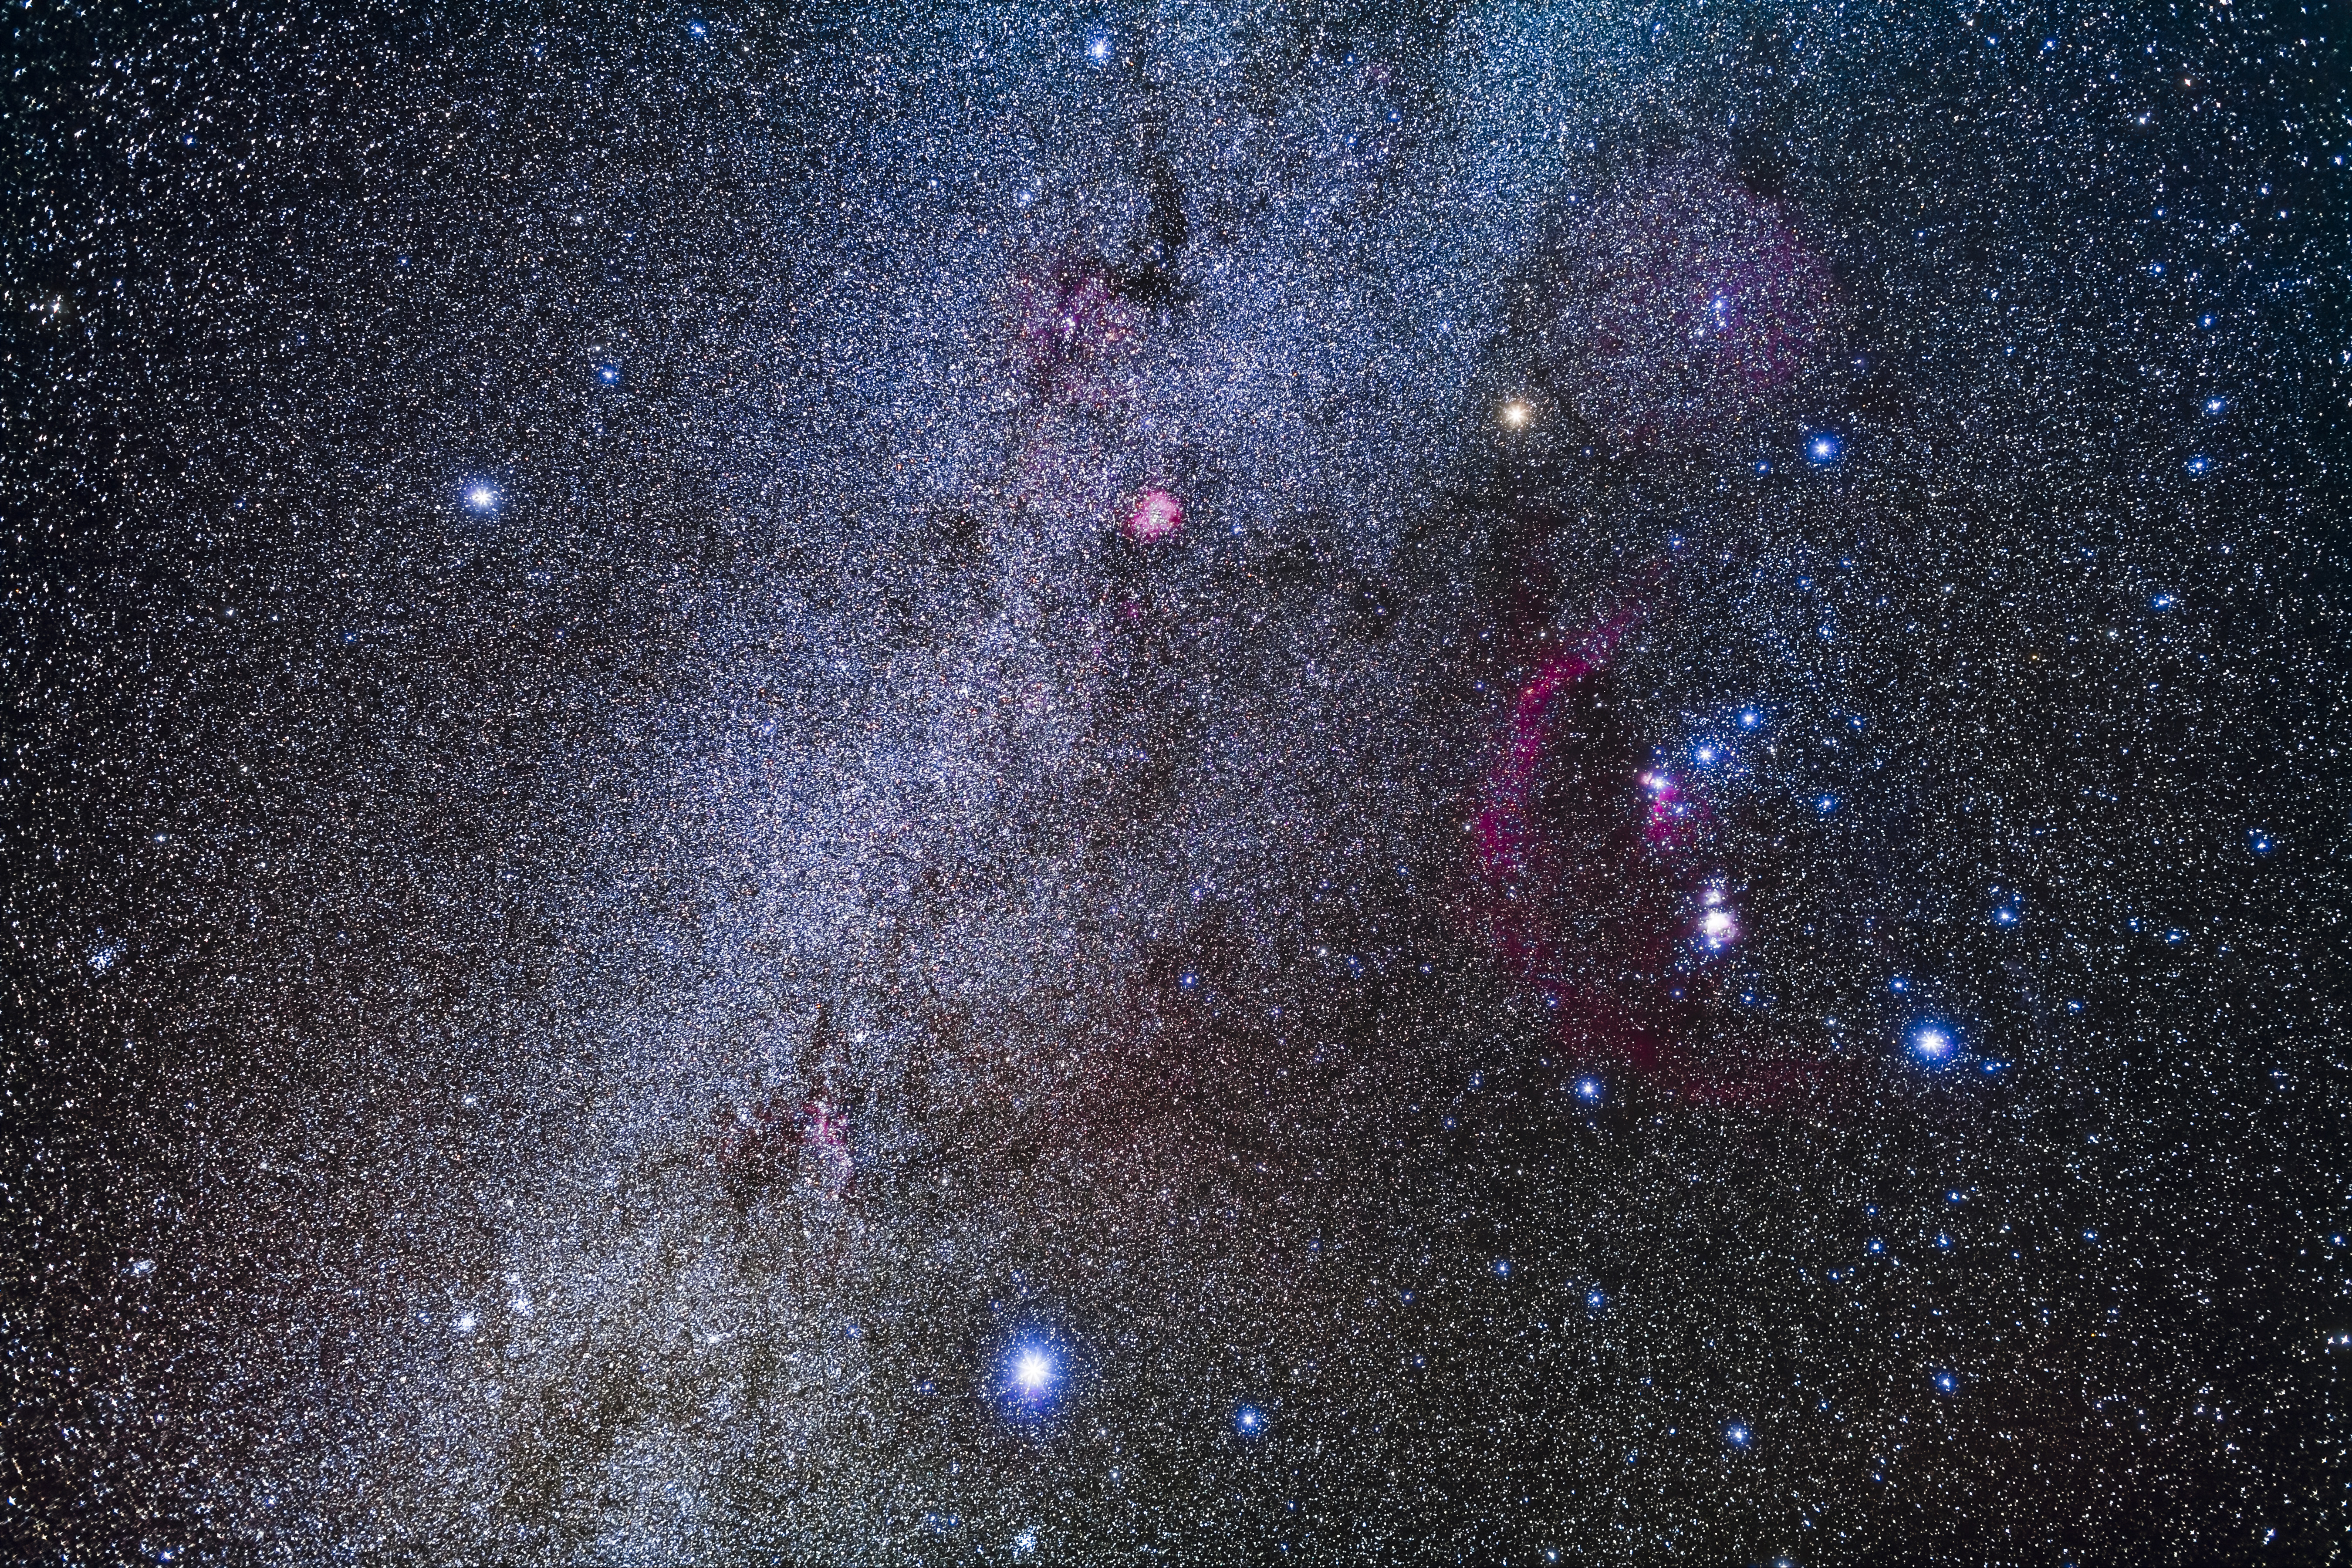 The constellation of Orion the Hunter